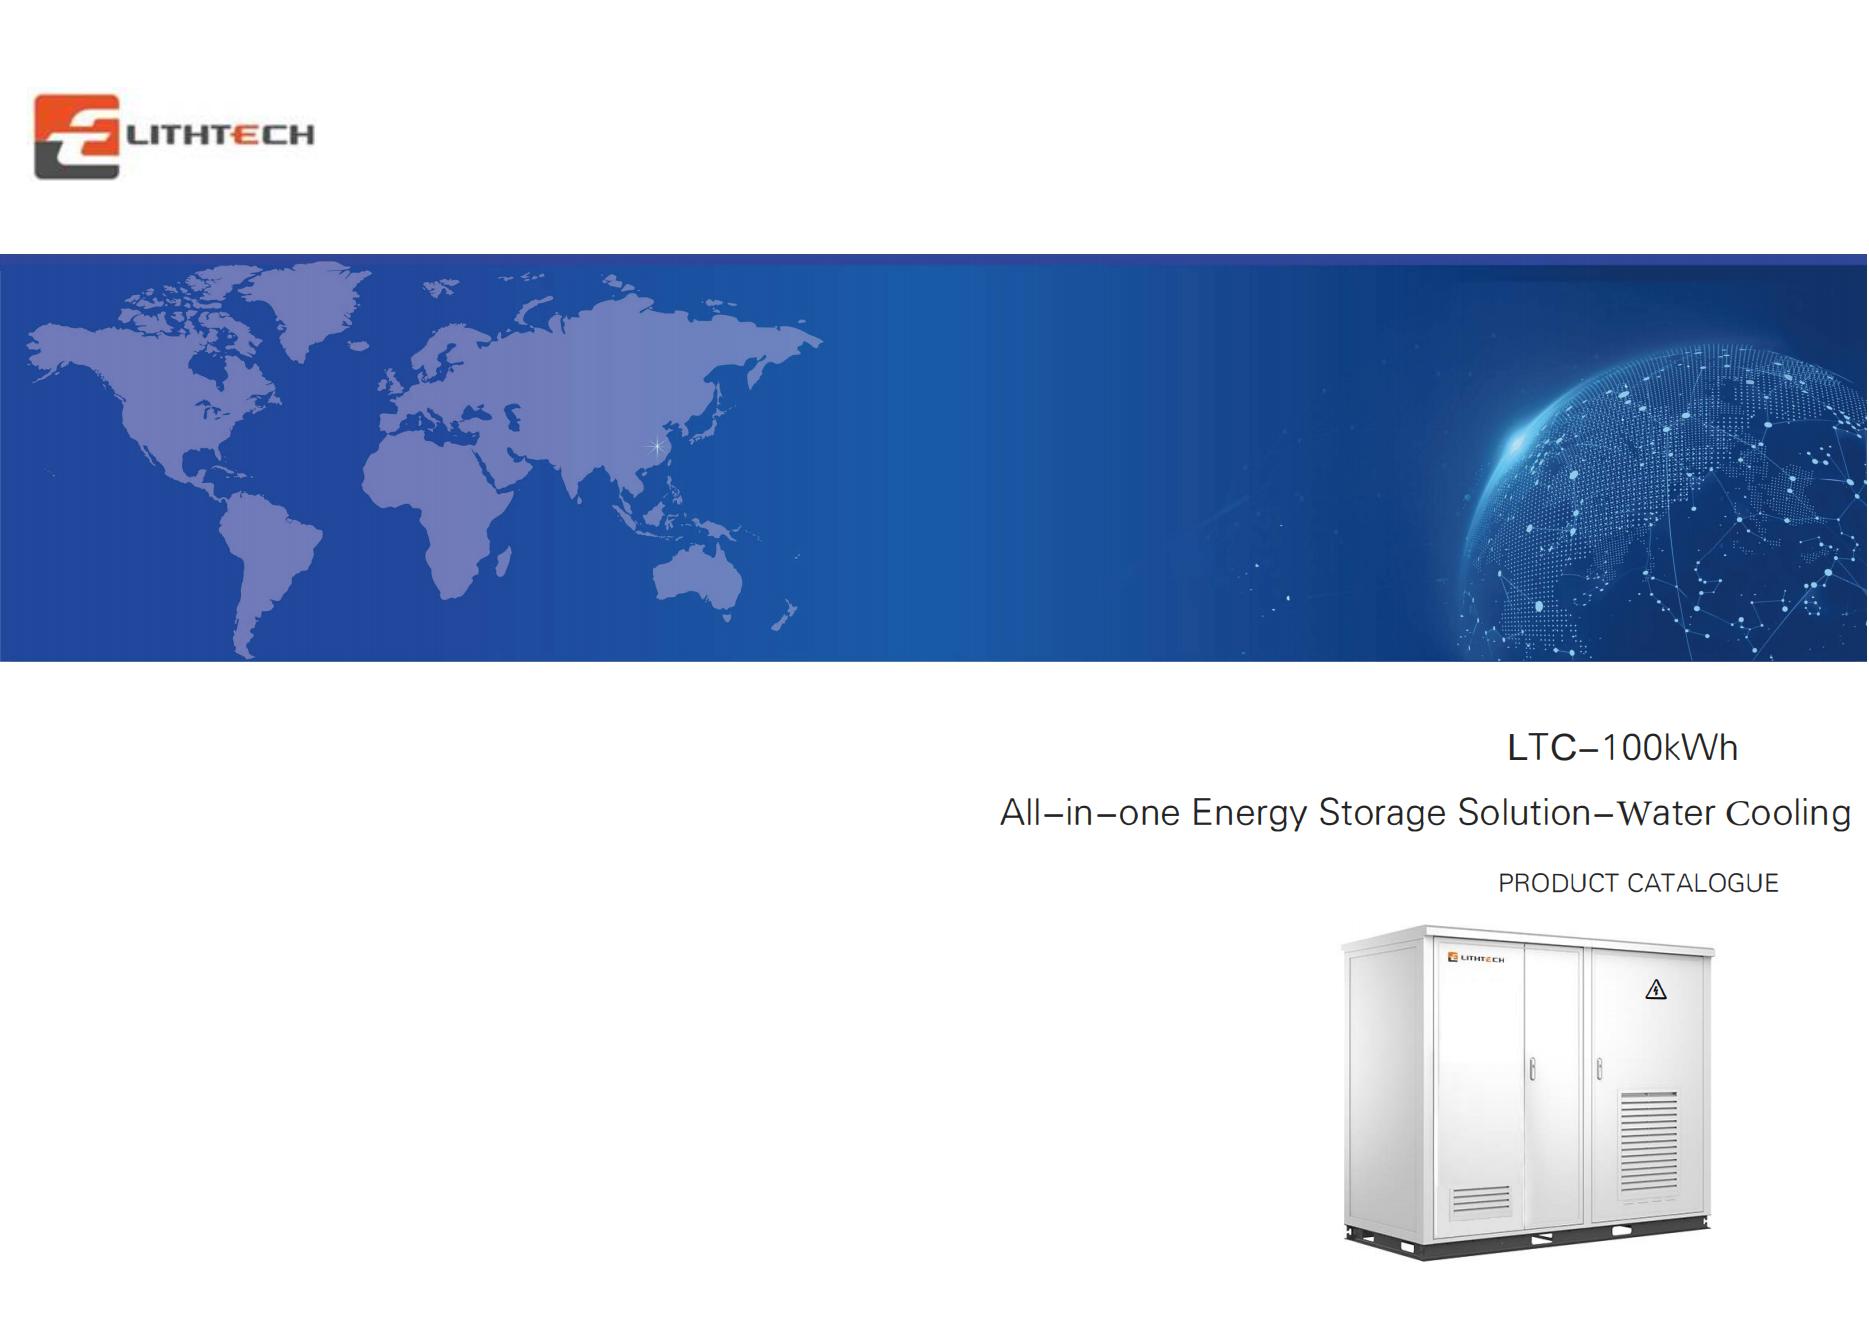 Lithtech 100kWh Liquid Cooling Industrial&Commercial Energy Storage System Solution